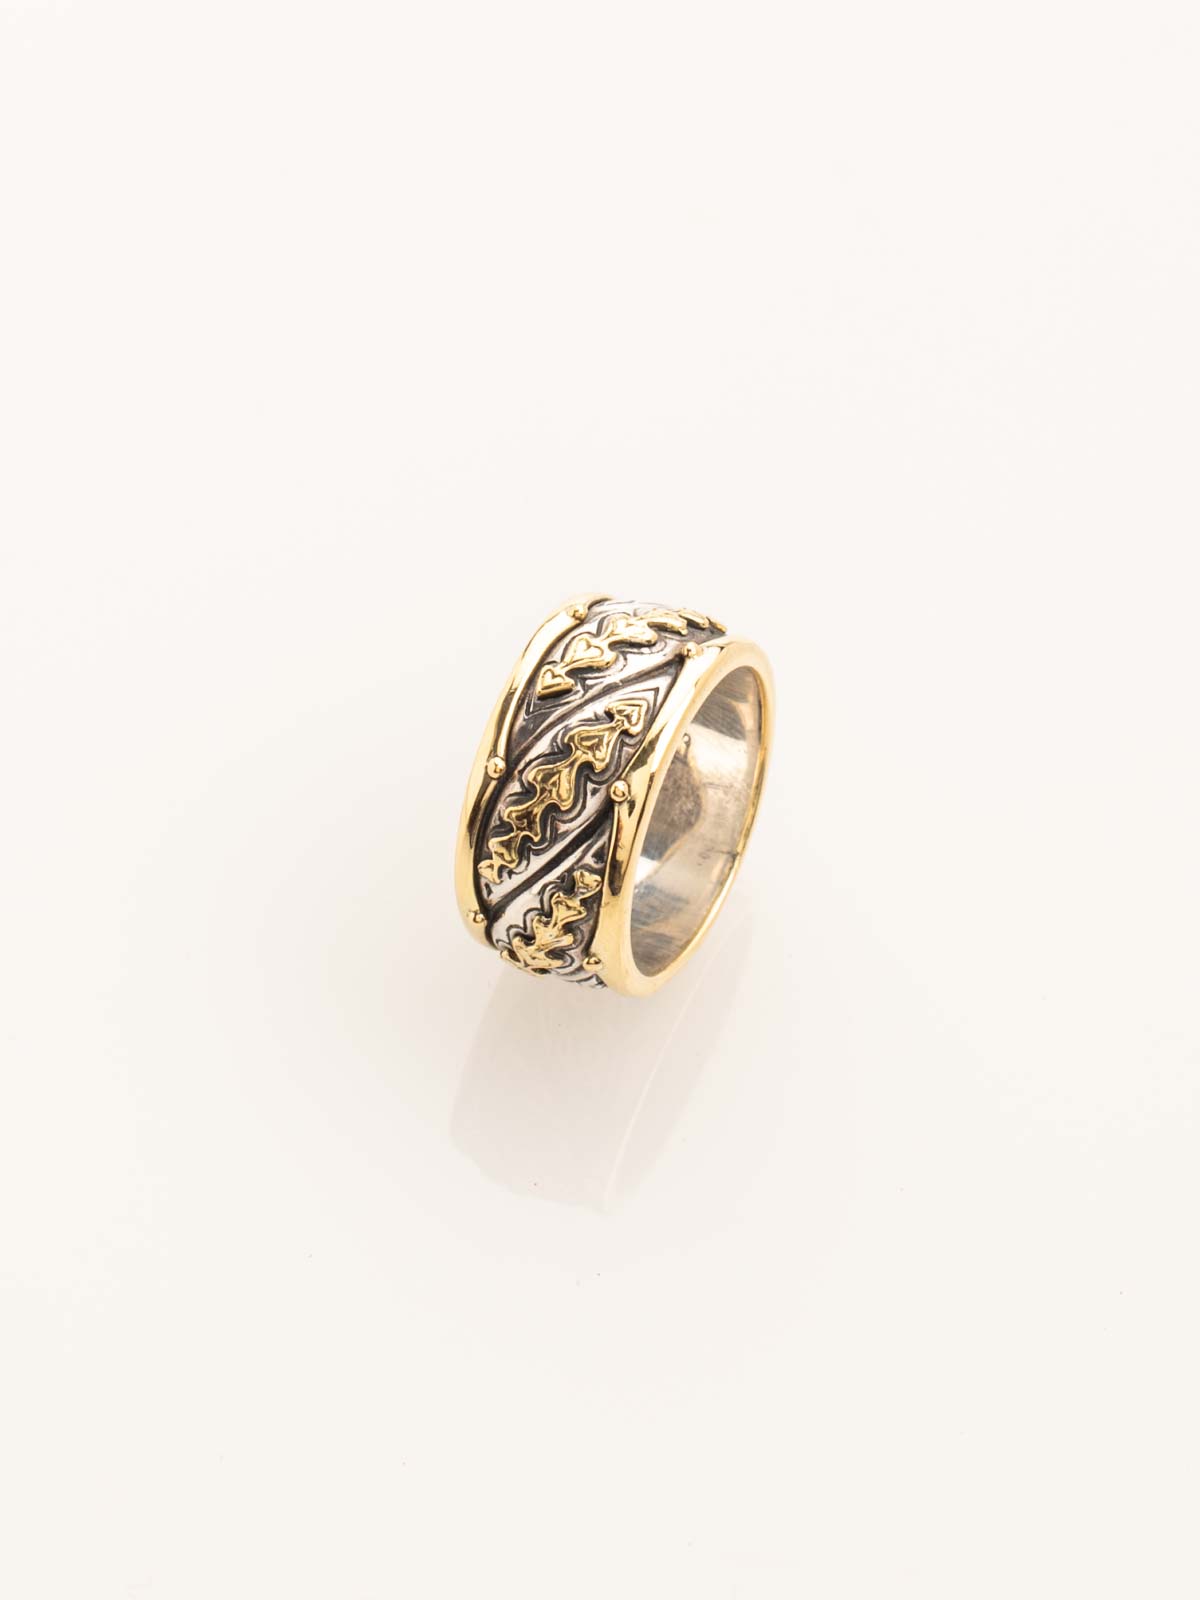 RING GOLD & SILVER